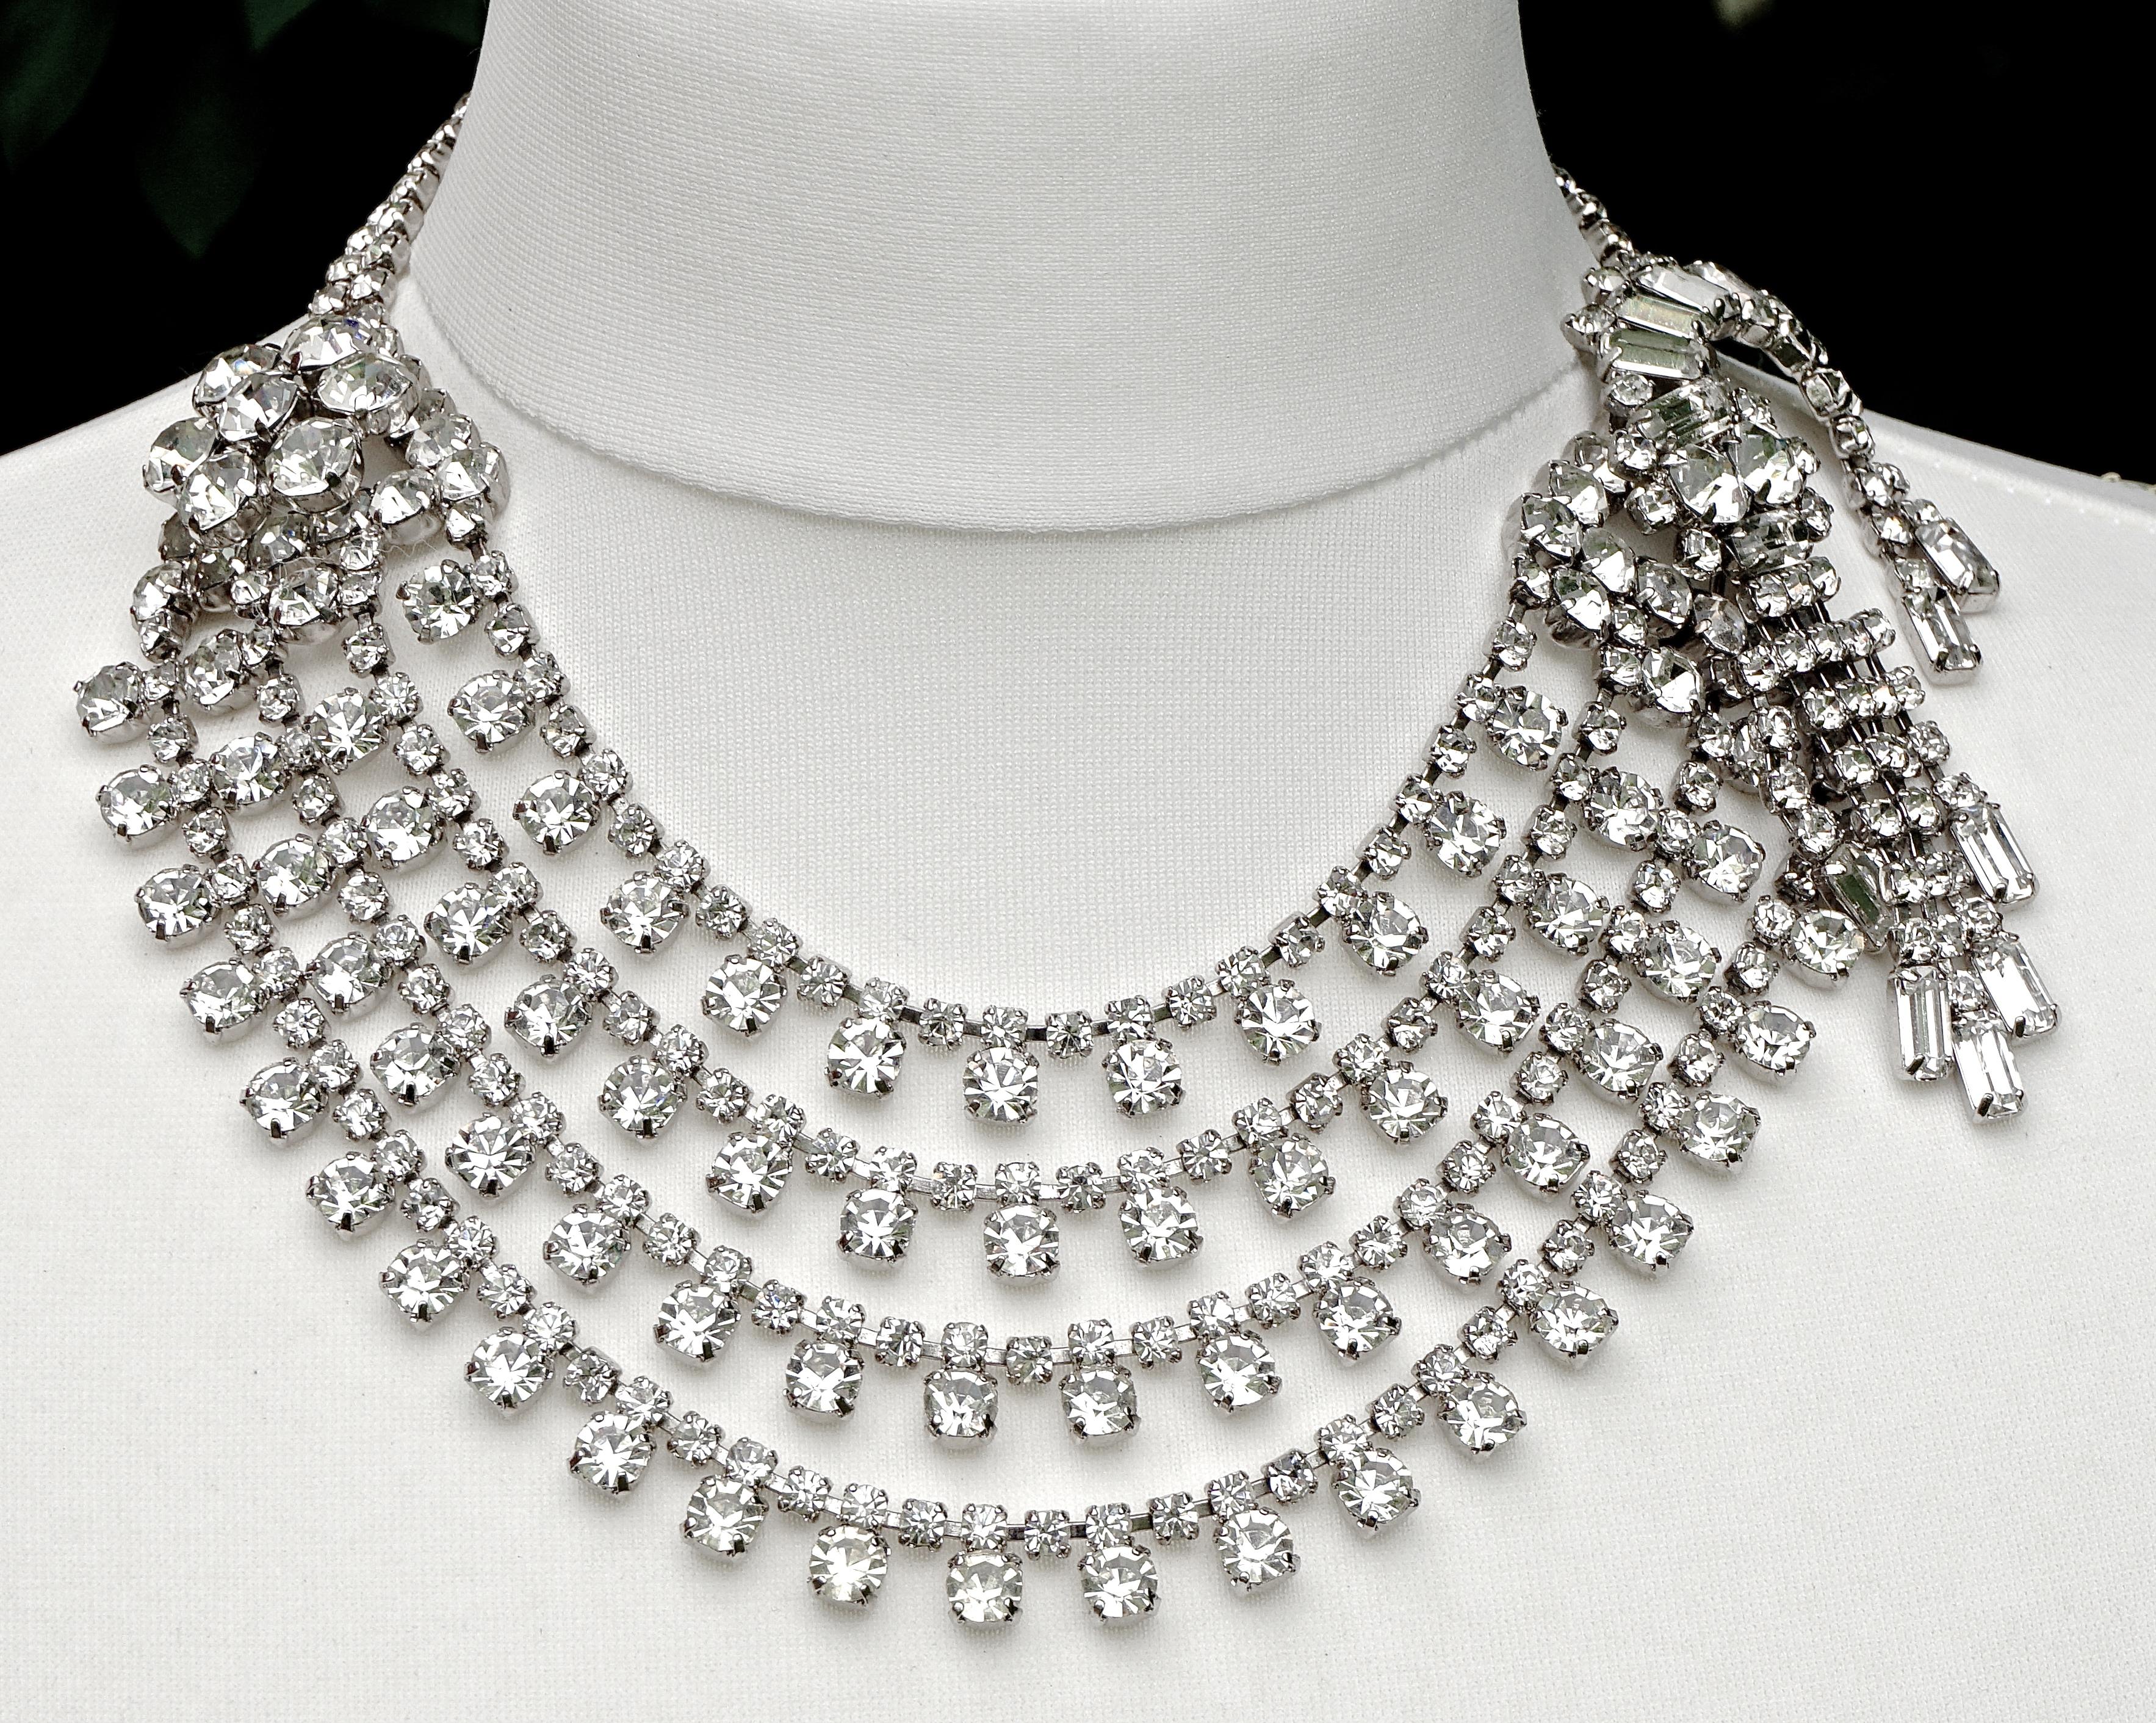 
Fabulous silver plated four strand rhinestone collar necklace. The necklace has a cluster of five large rhinestones to one side, and the other side features a wonderful tremblant design with round and baguette rhinestones. The shortest length is